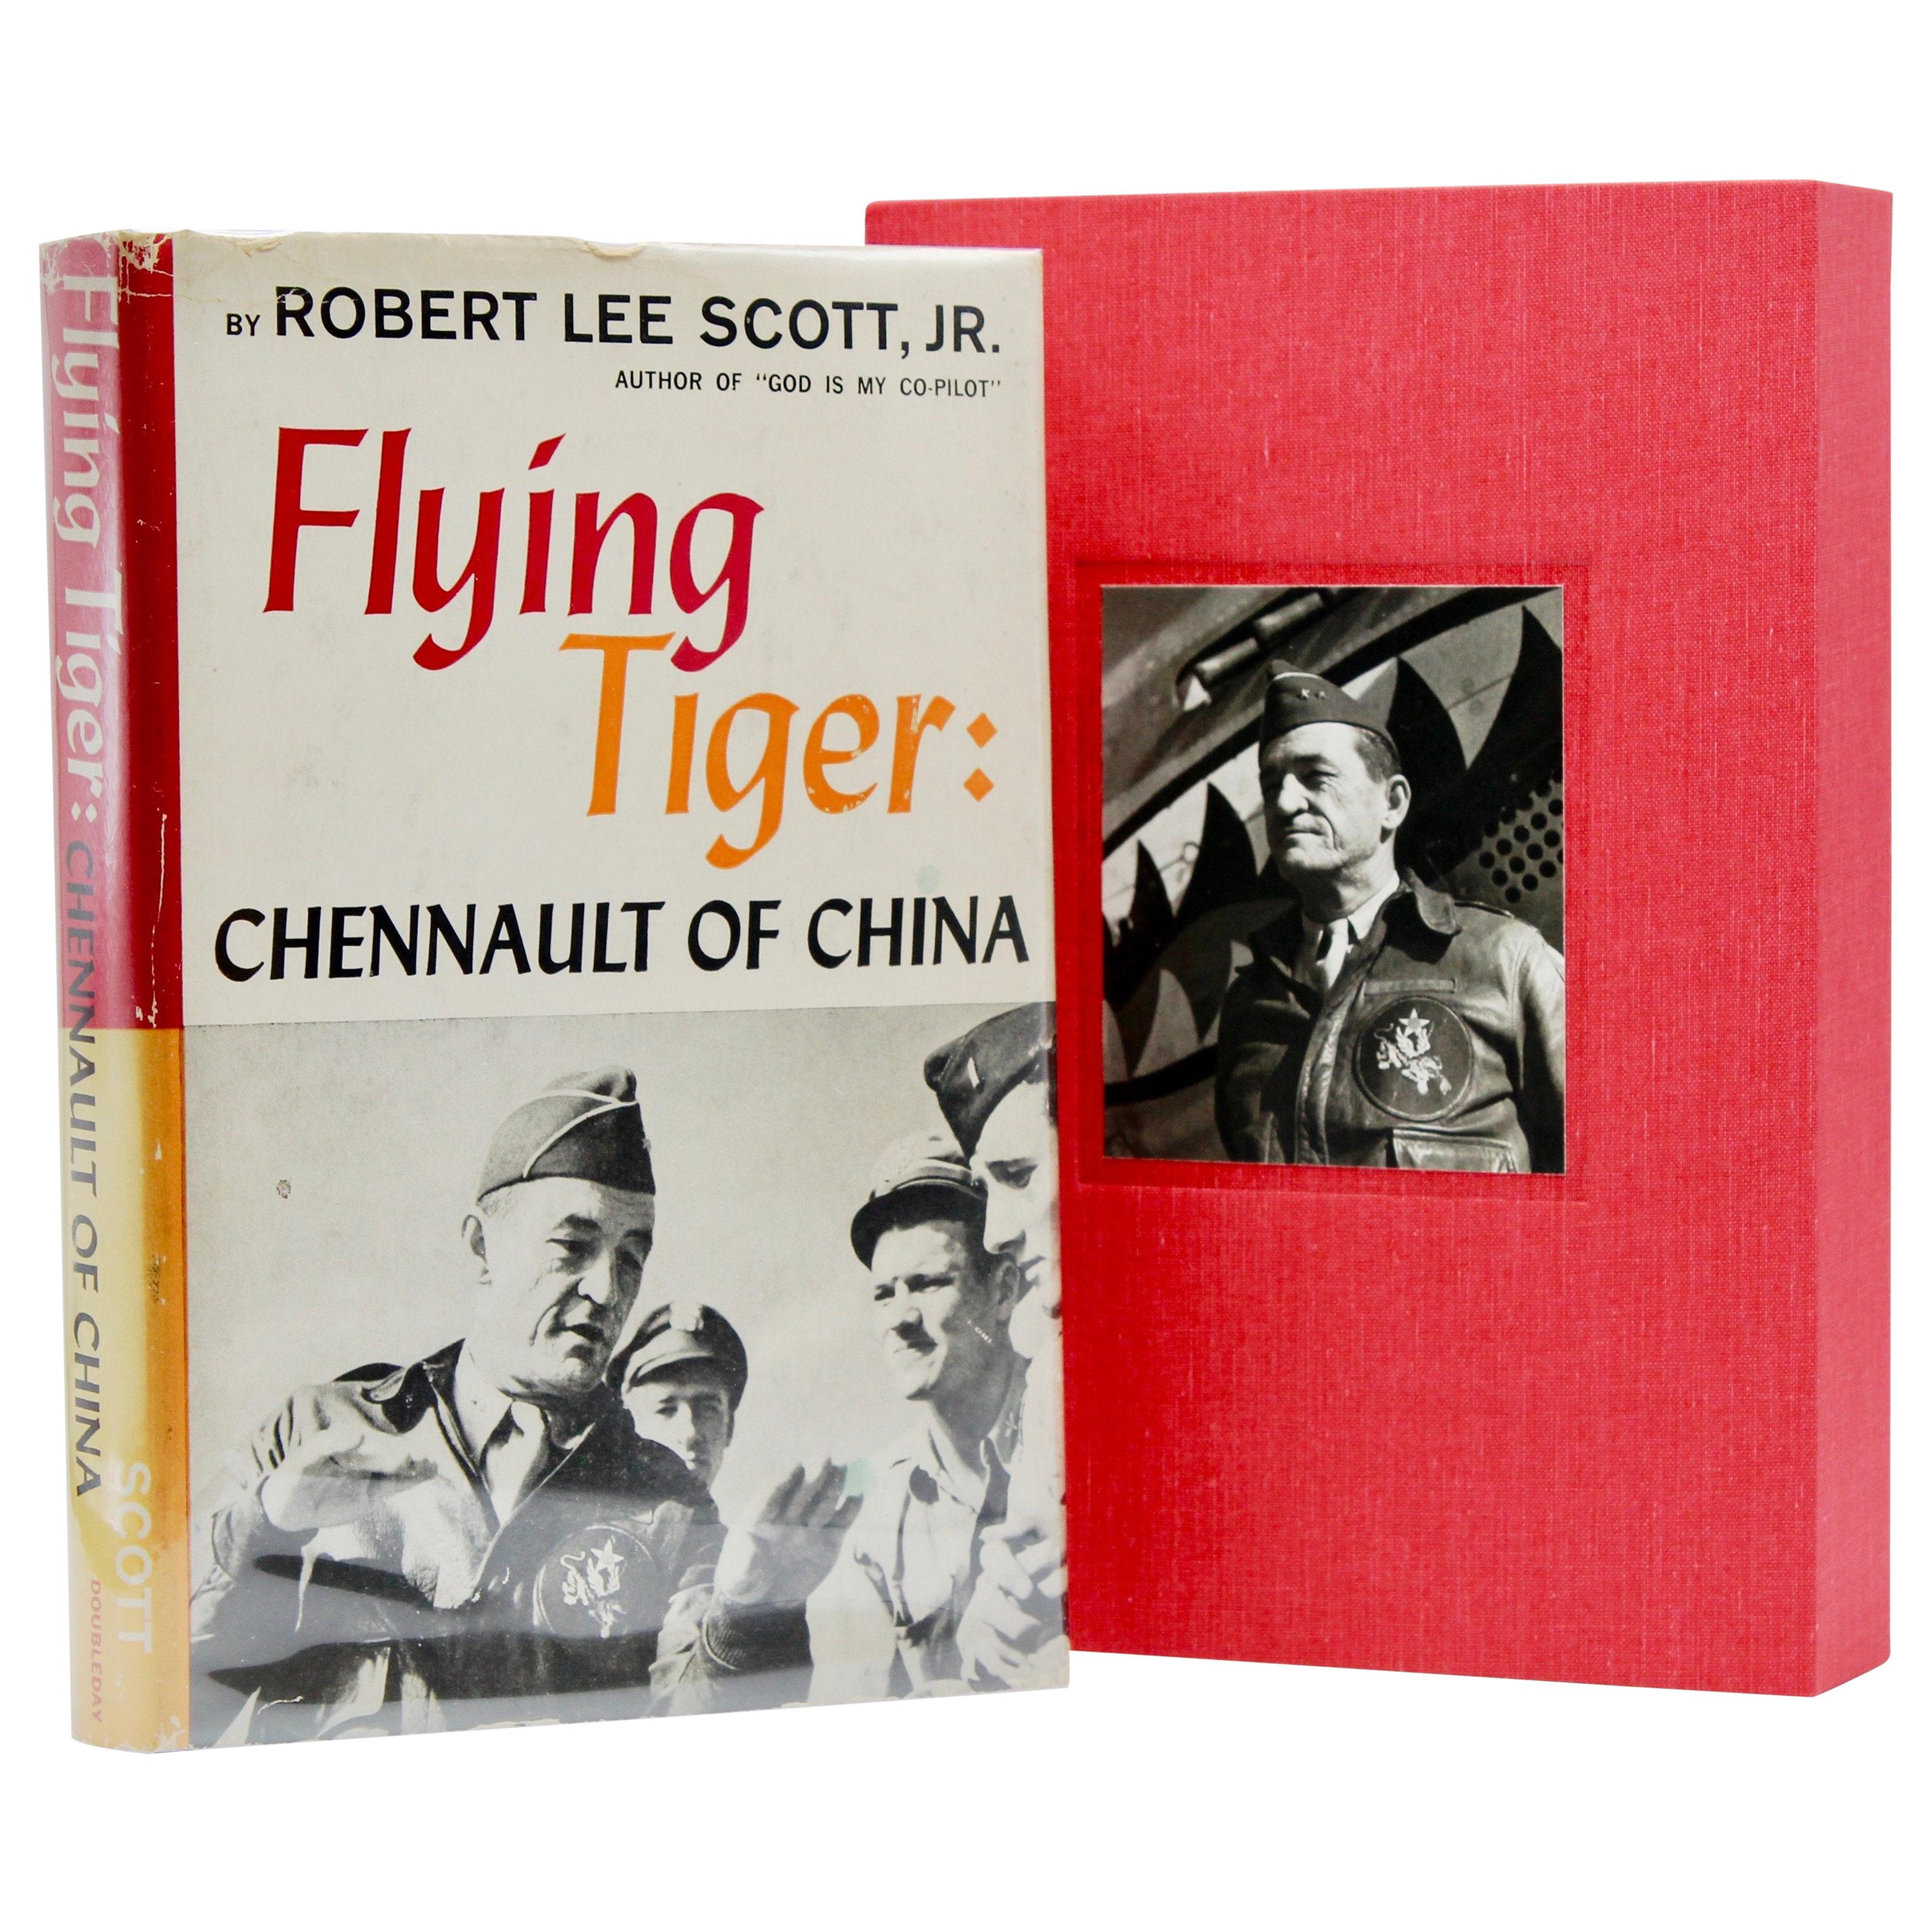 Flying Tiger: Chennault of China, Twice-Signed by Robert Lee Scott, Jr., 1st Ed.